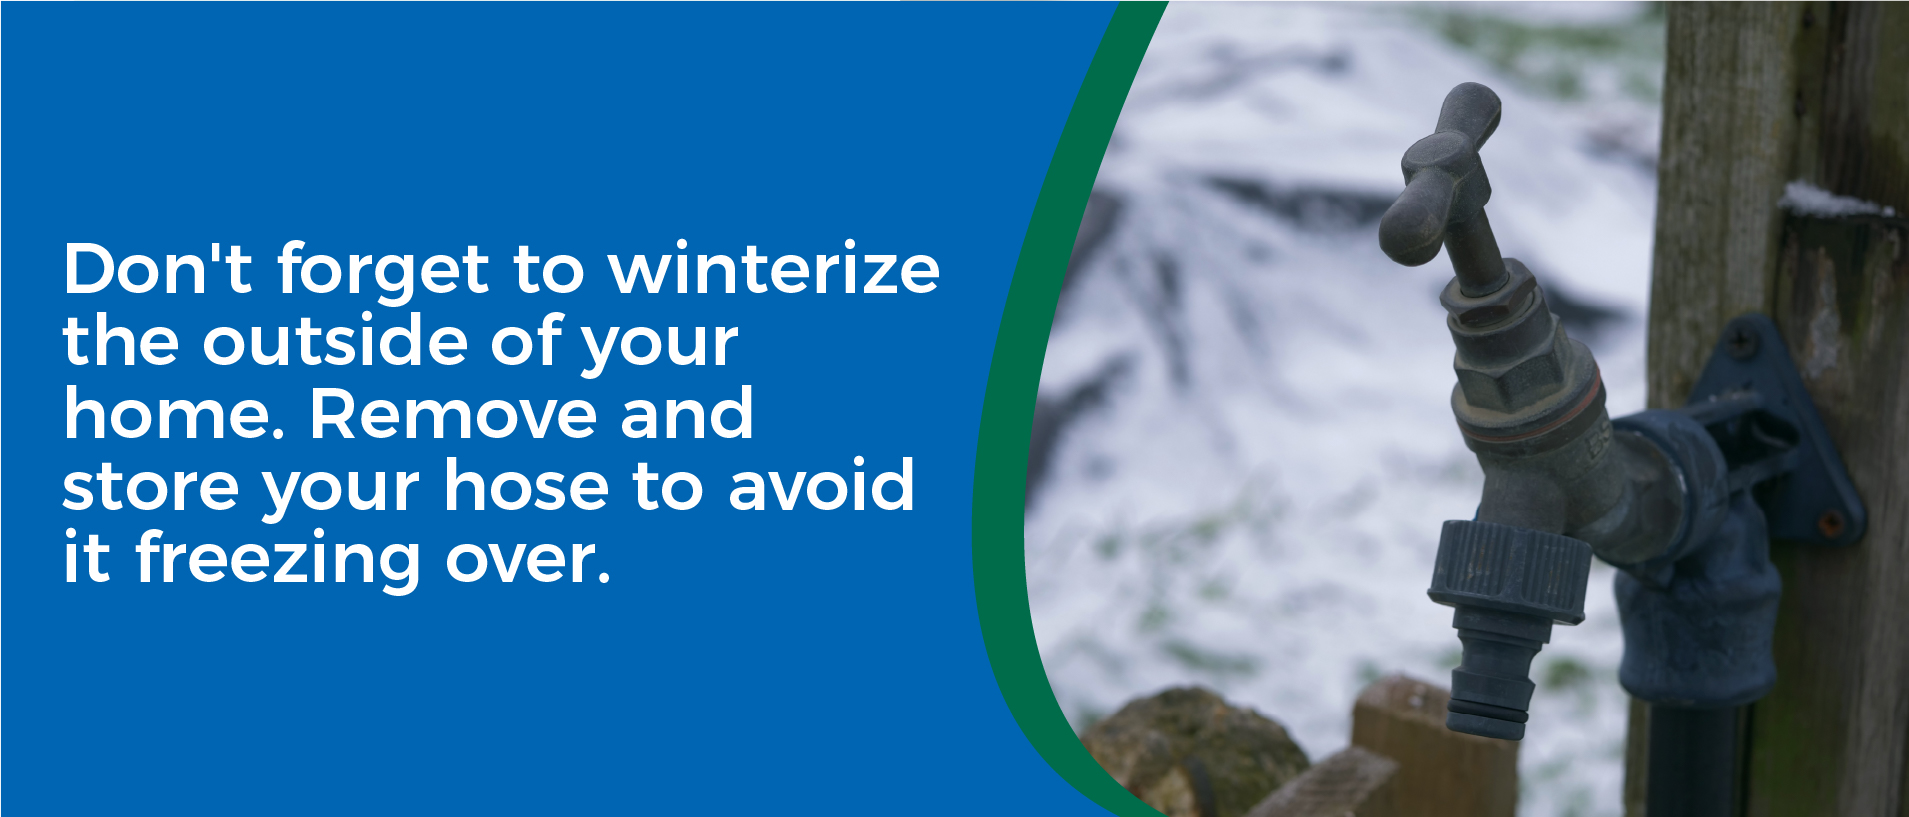 Don't forget to winterize the outside of your home. Remove and store your hose to avoid it freezing over - image of an outdoor hose